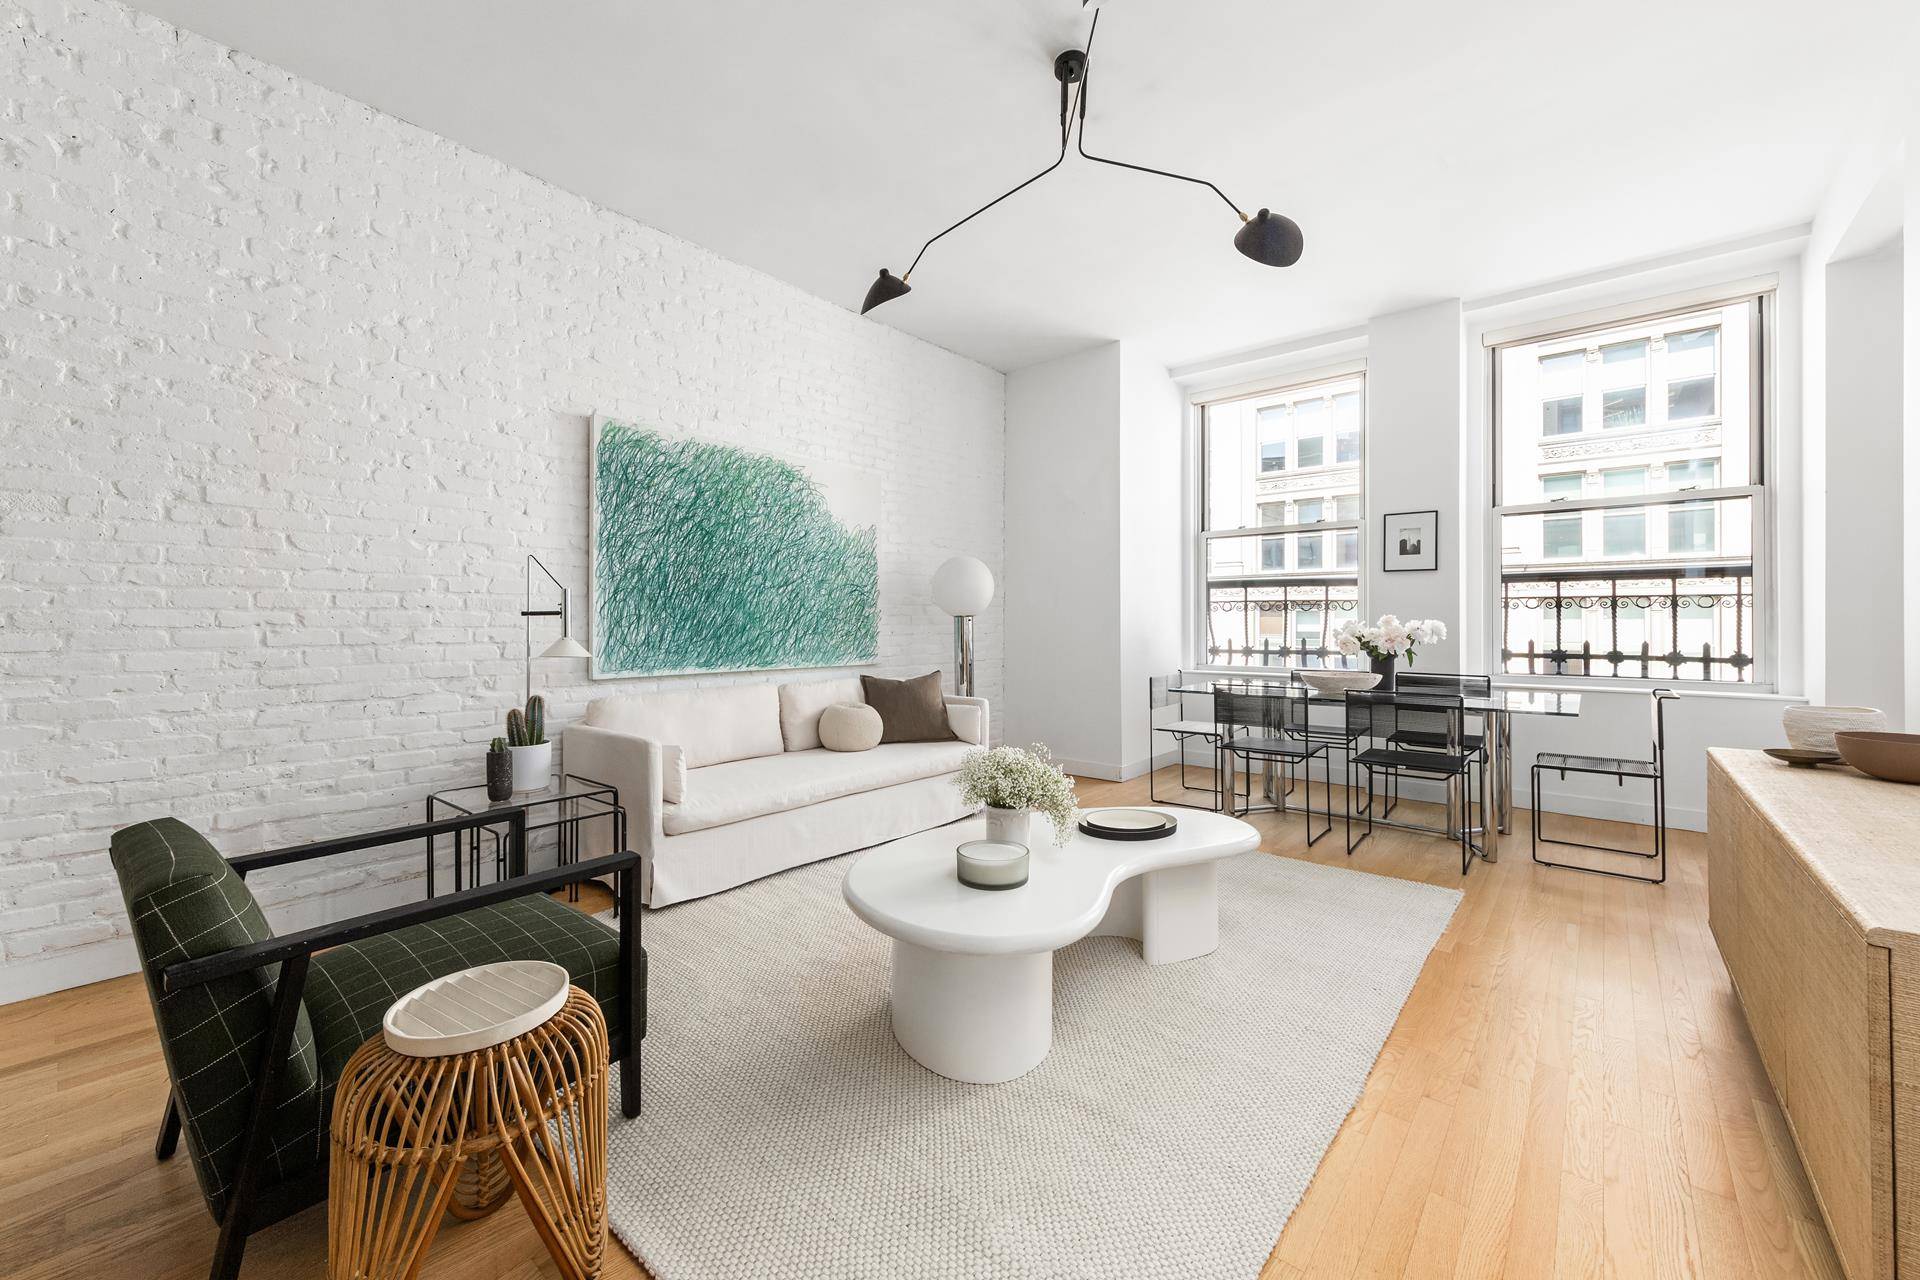 Don't miss this meticulously maintained 2 bedroom, 2 bath loft in a well run, pre war condominium in the vibrant Flatiron Chelsea neighborhood.